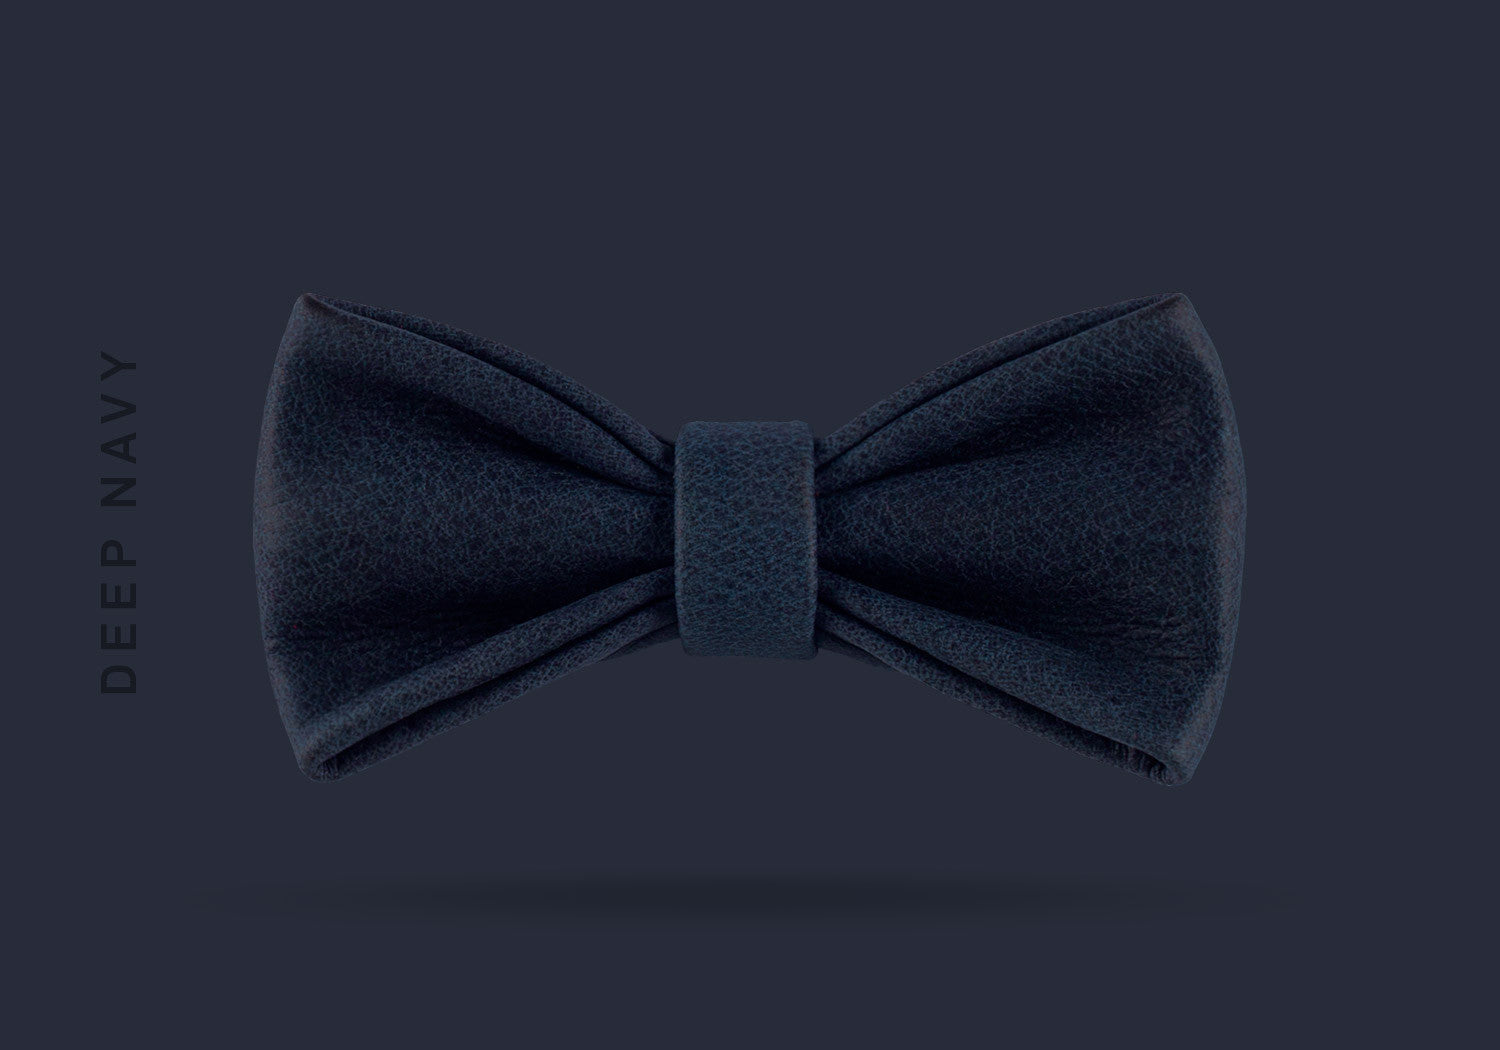 This deep navy WEEF handmade leather bow is a great present or gift idea for dapper and stylish gentlemen for fathers day, valentines day or Christmas.